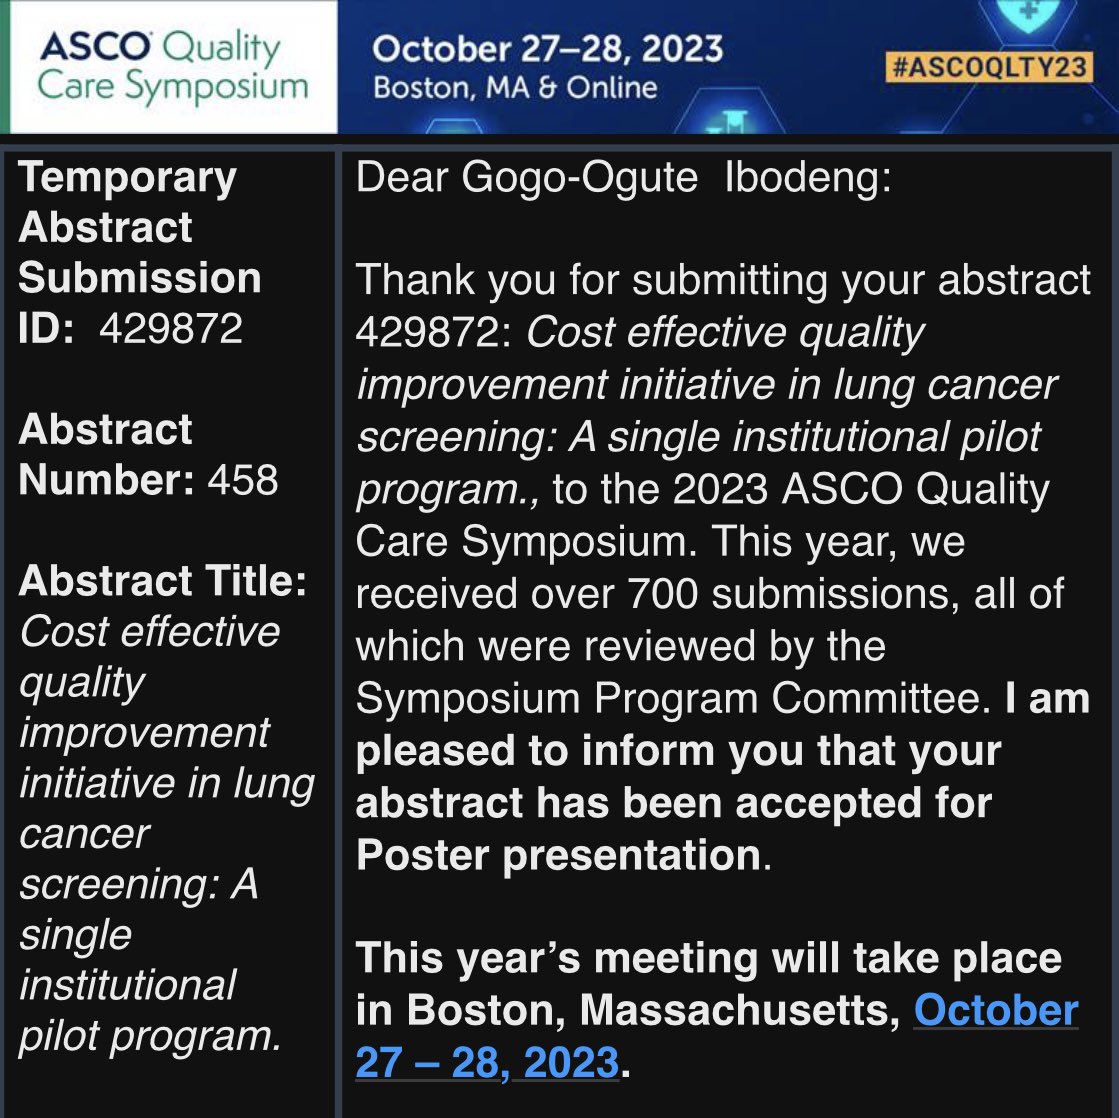 Honored to have our abstract accepted for a poster presentation this fall in Boston @ASCO #ASCOQLTY . This was such an impactful experience & work by our team and I look forward to discussing our strategies and outcome #Lungcancer #Lcsm #QualityImprovement #oncology #MedTwitter